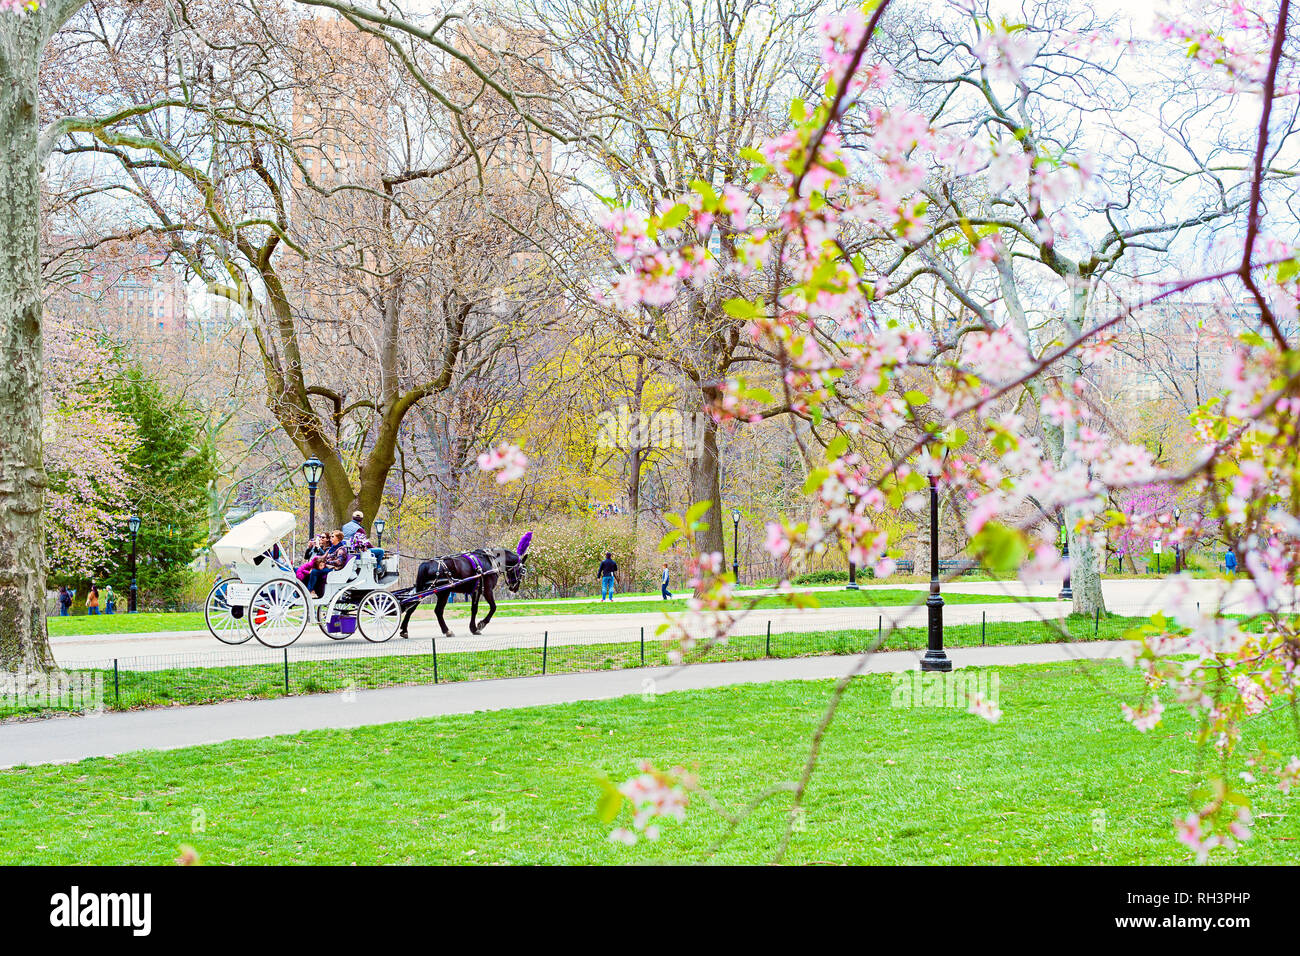 Hansom Cab Spring blossoms in Central Park, New York City. Banque D'Images